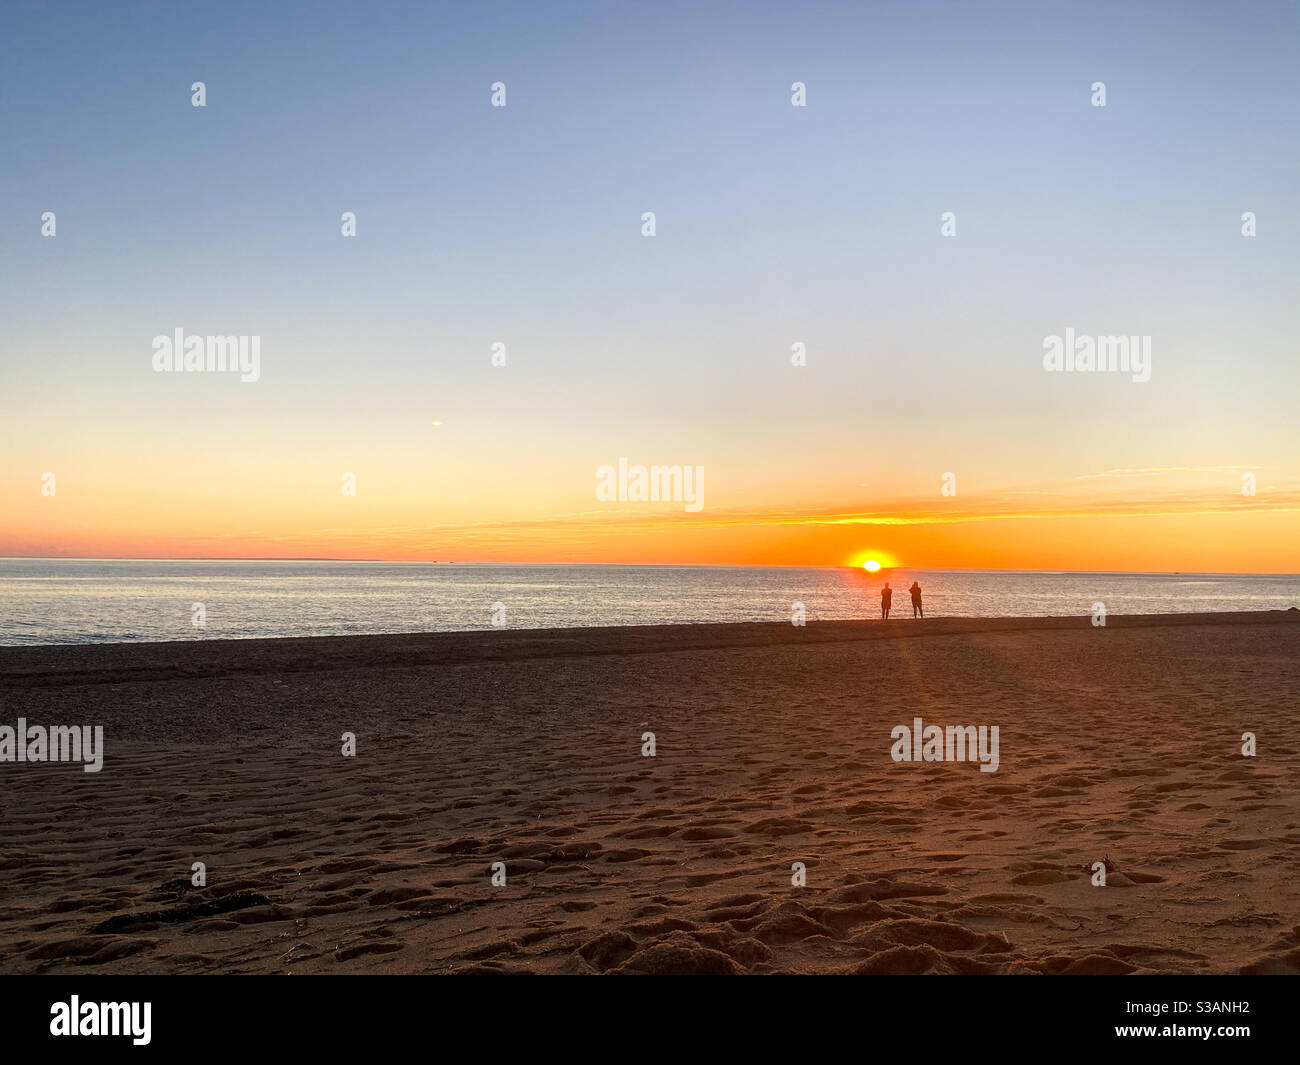 People gather, but stay socially distant to watch the sunset at Herring Cove Beach in Provincetown, Massachusetts on September 4, 2020. Stock Photo